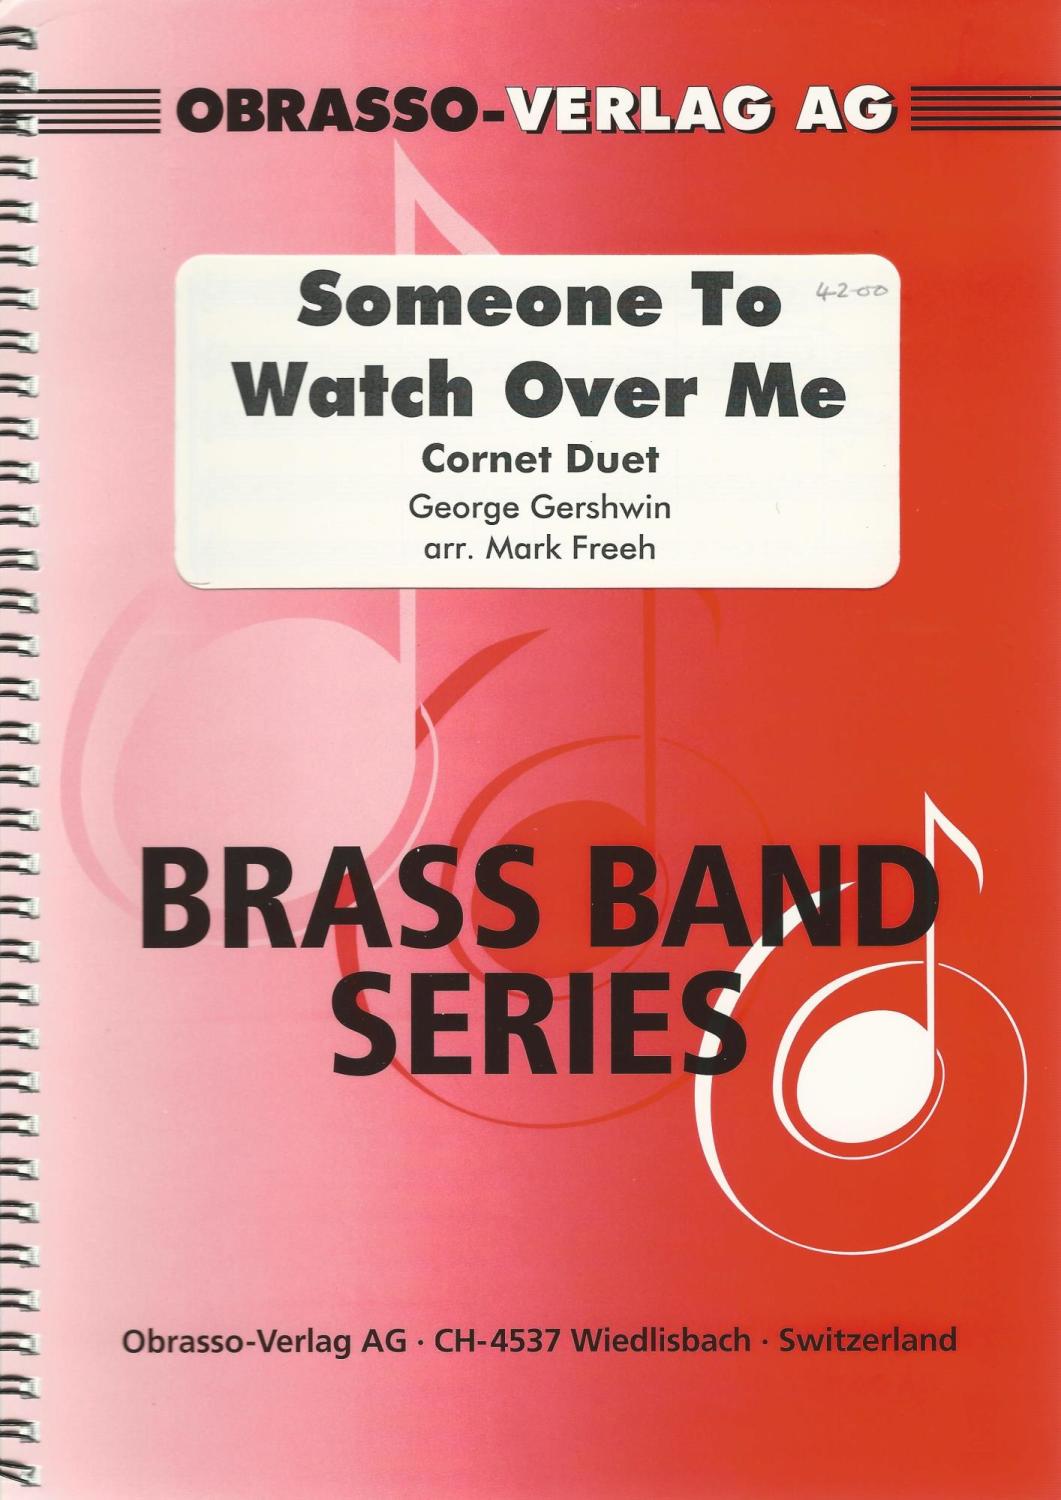 Someone to Watch Over Me, Cornet Duet for Brass Band - George Gershwin, arr